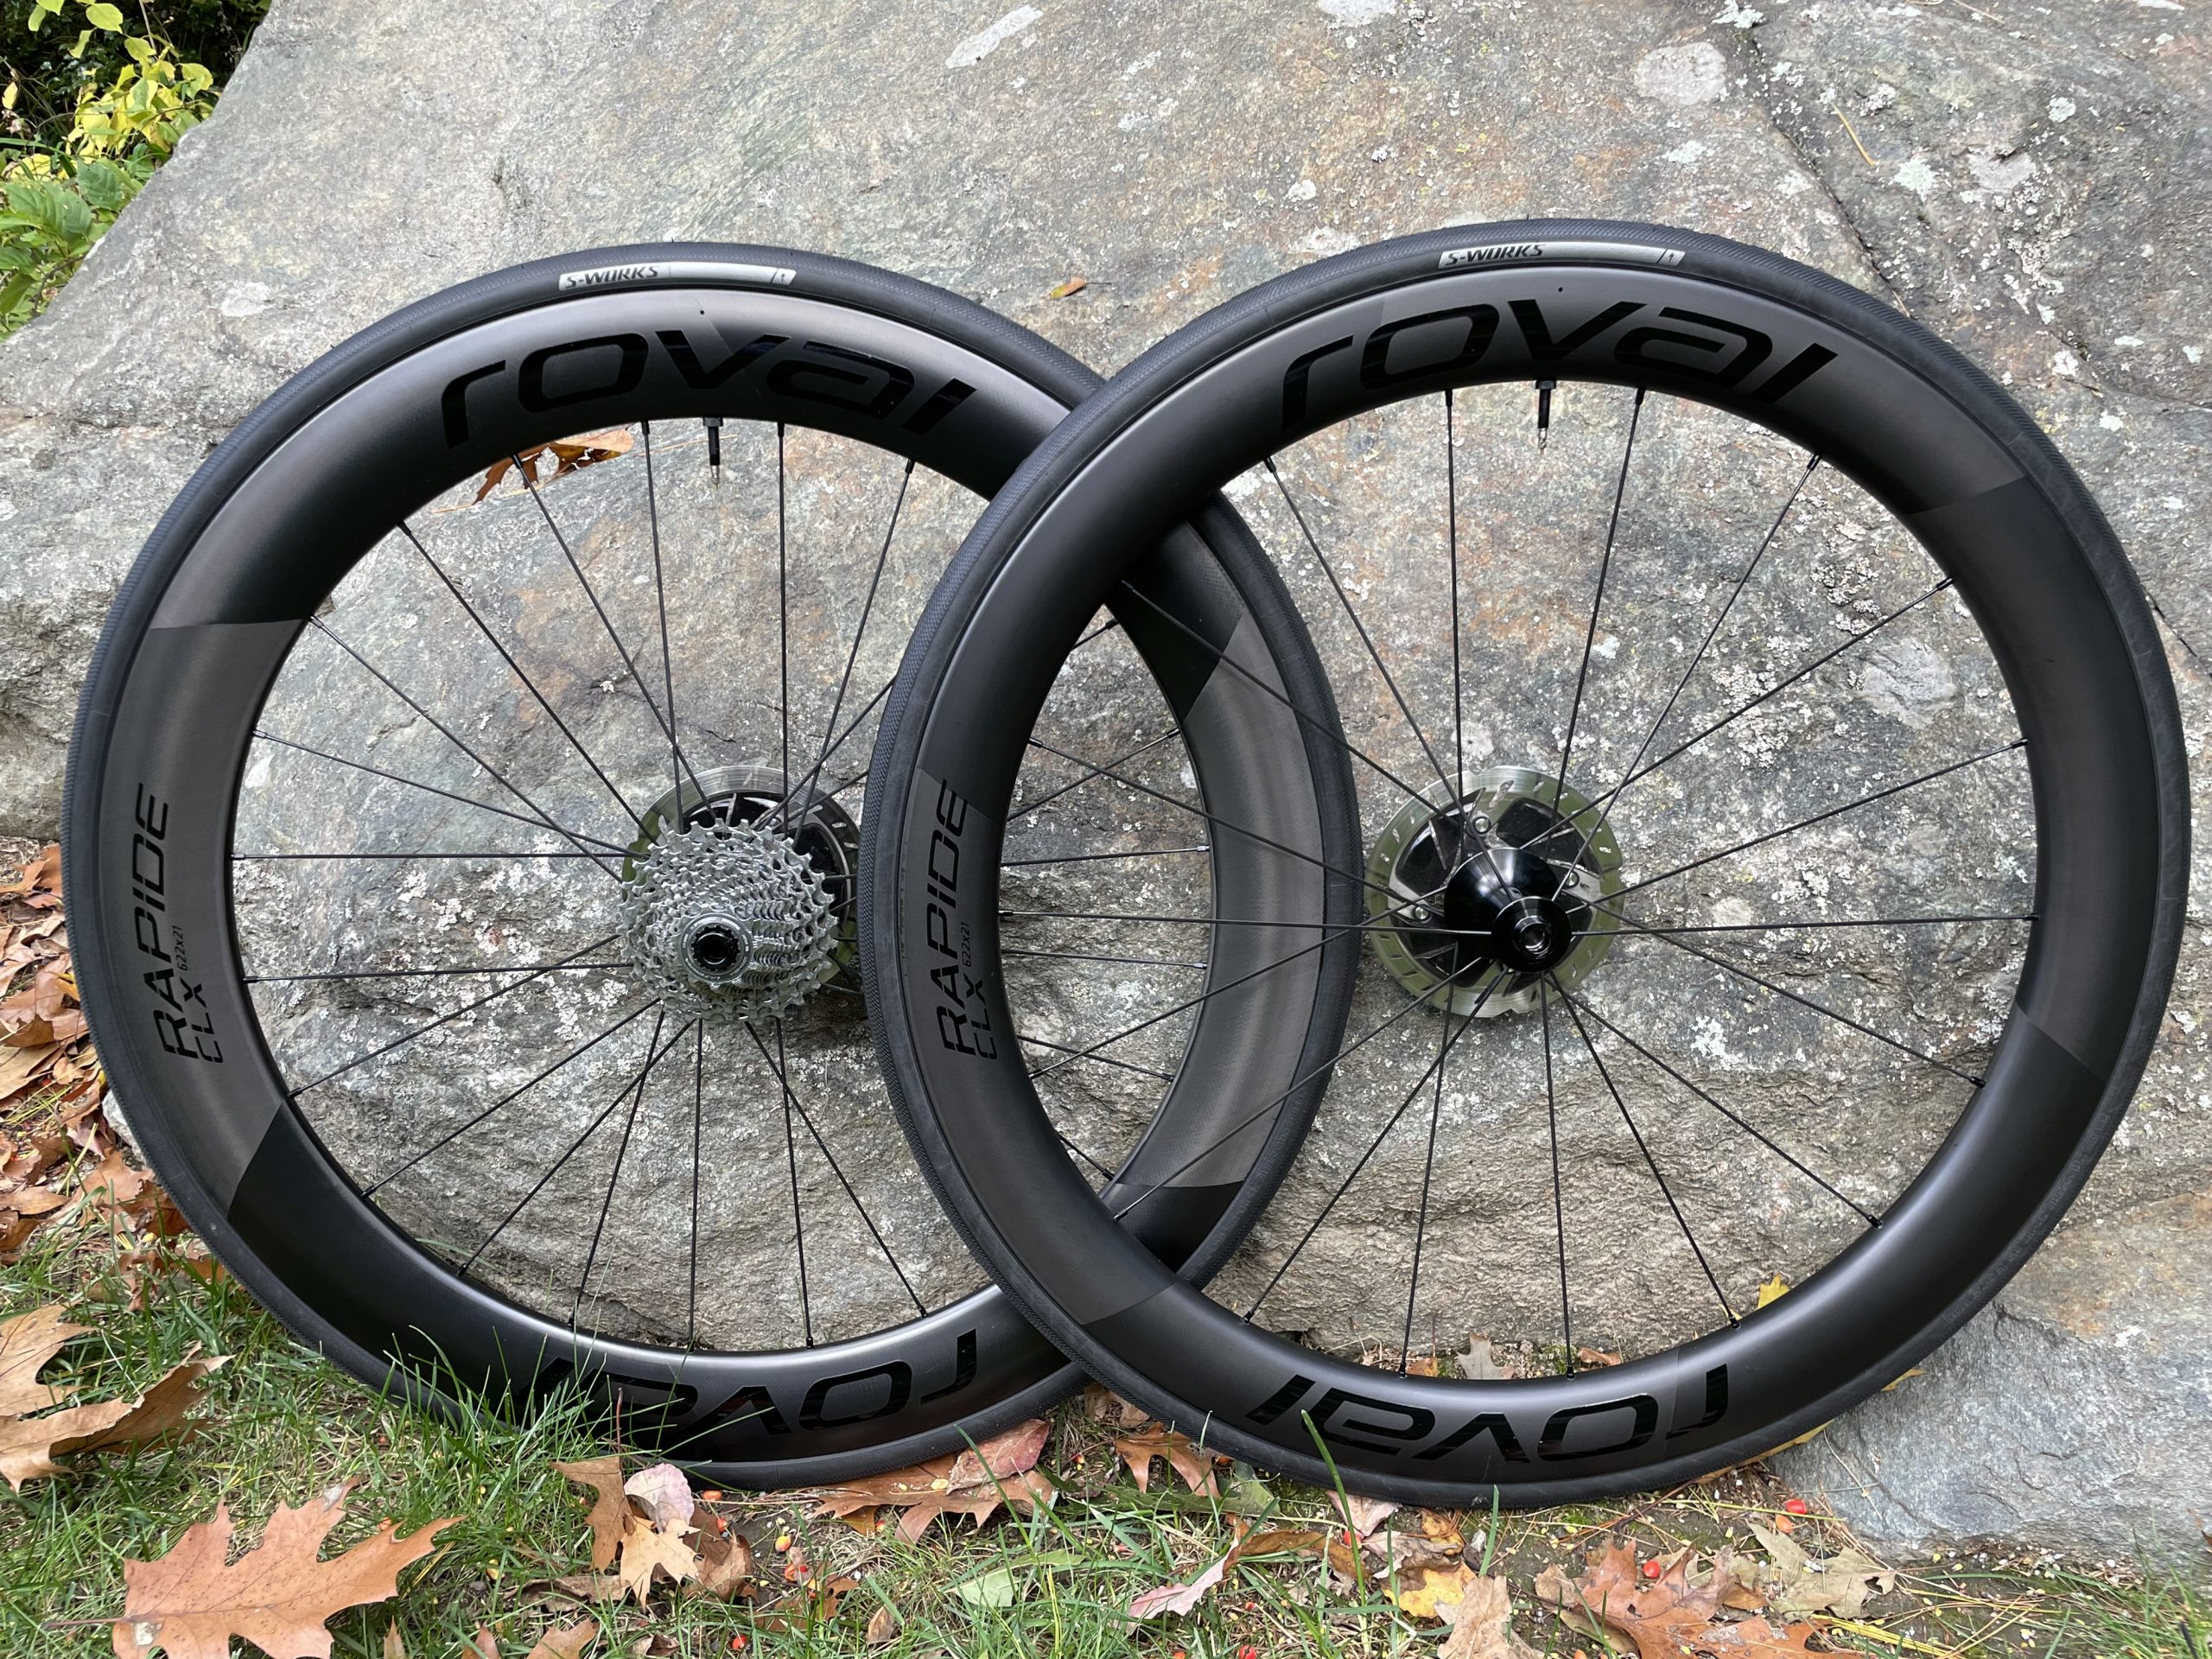 ROVAL RAPIDE CLX II - RACE OR FUN MODE? - In The Know Cycling